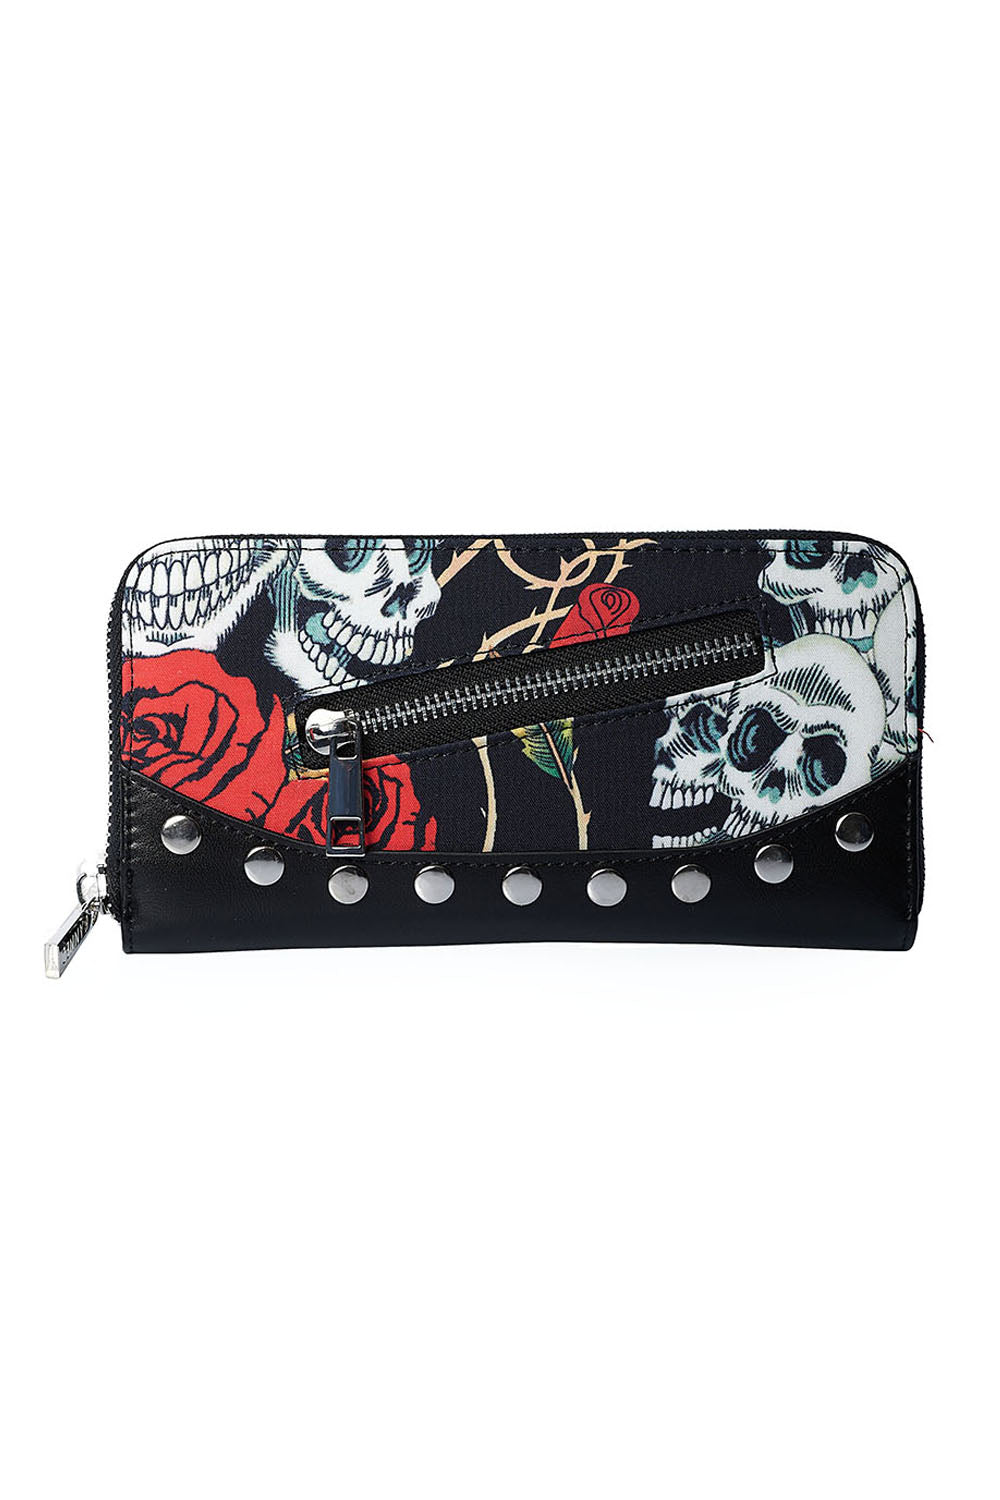 Banned Alternative Skull and Roses Wallet